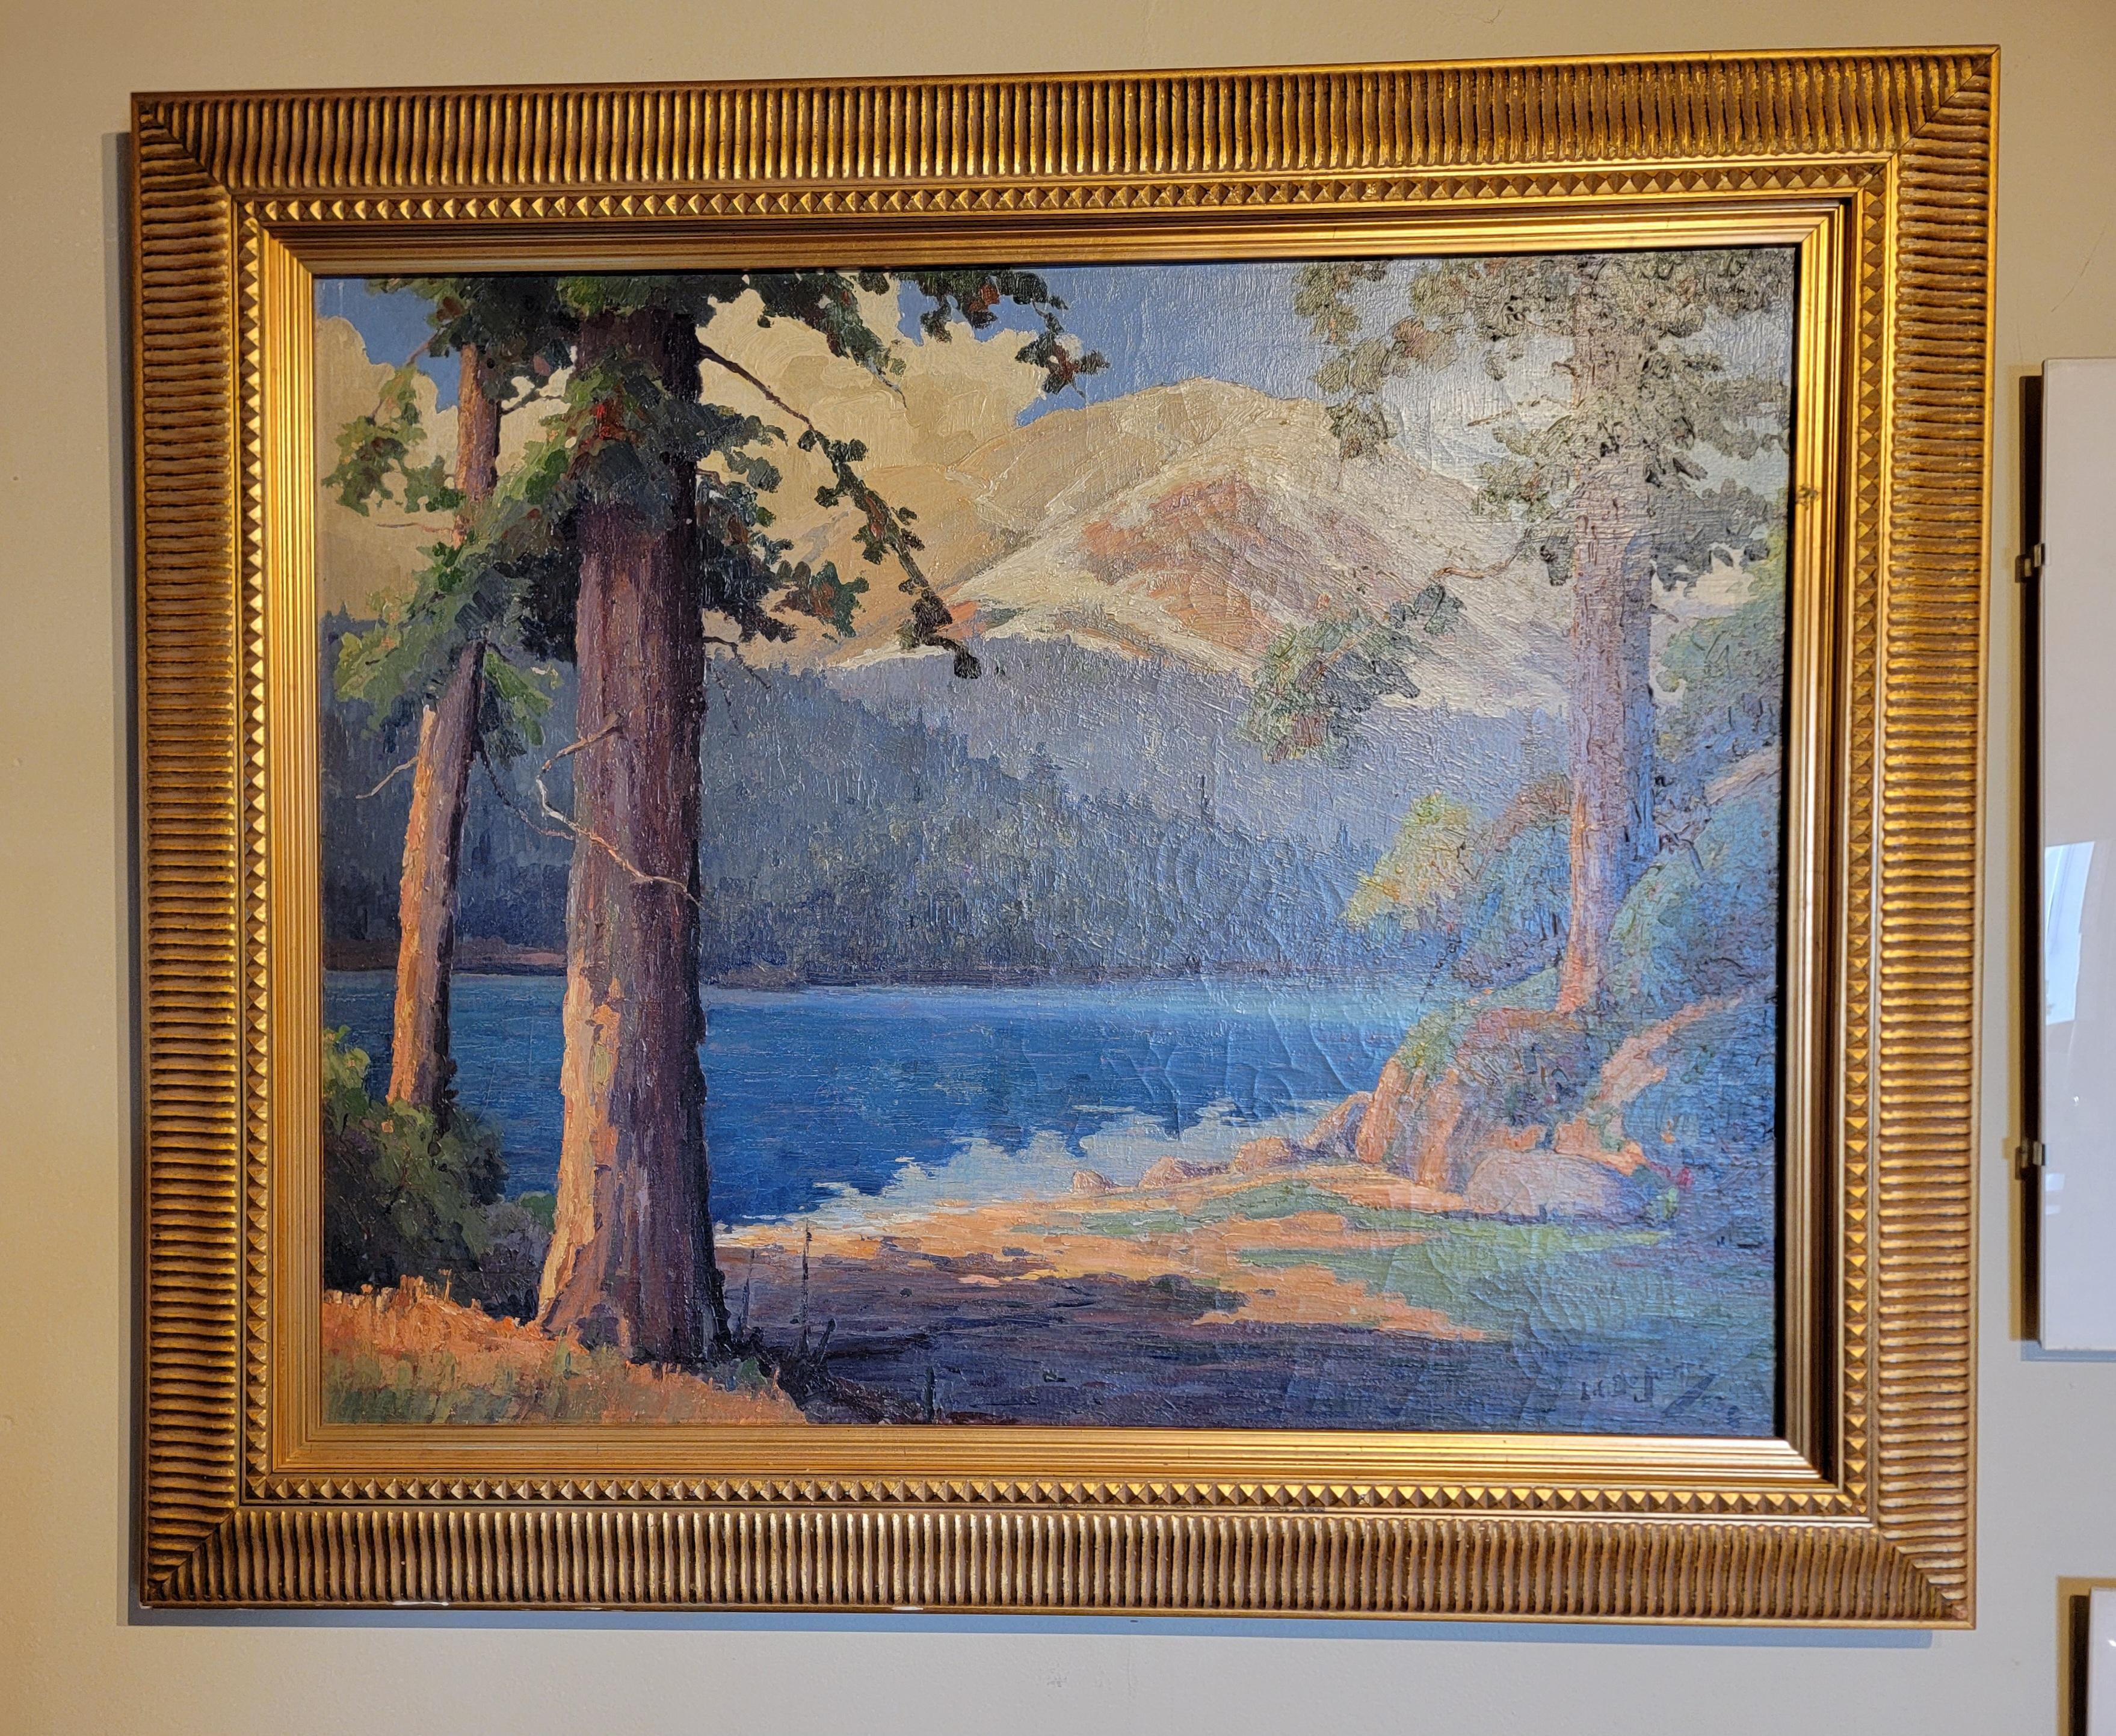 Original impressionist oil painting on canvas of redwood trees, mountains and lake by listed California Artist  Luther Evans De Joiner. (1886-1954). Born: 1886 - Switzer, Kentucky. Died: 1954 - Santa Cruz, California. Includes frame, canvas only